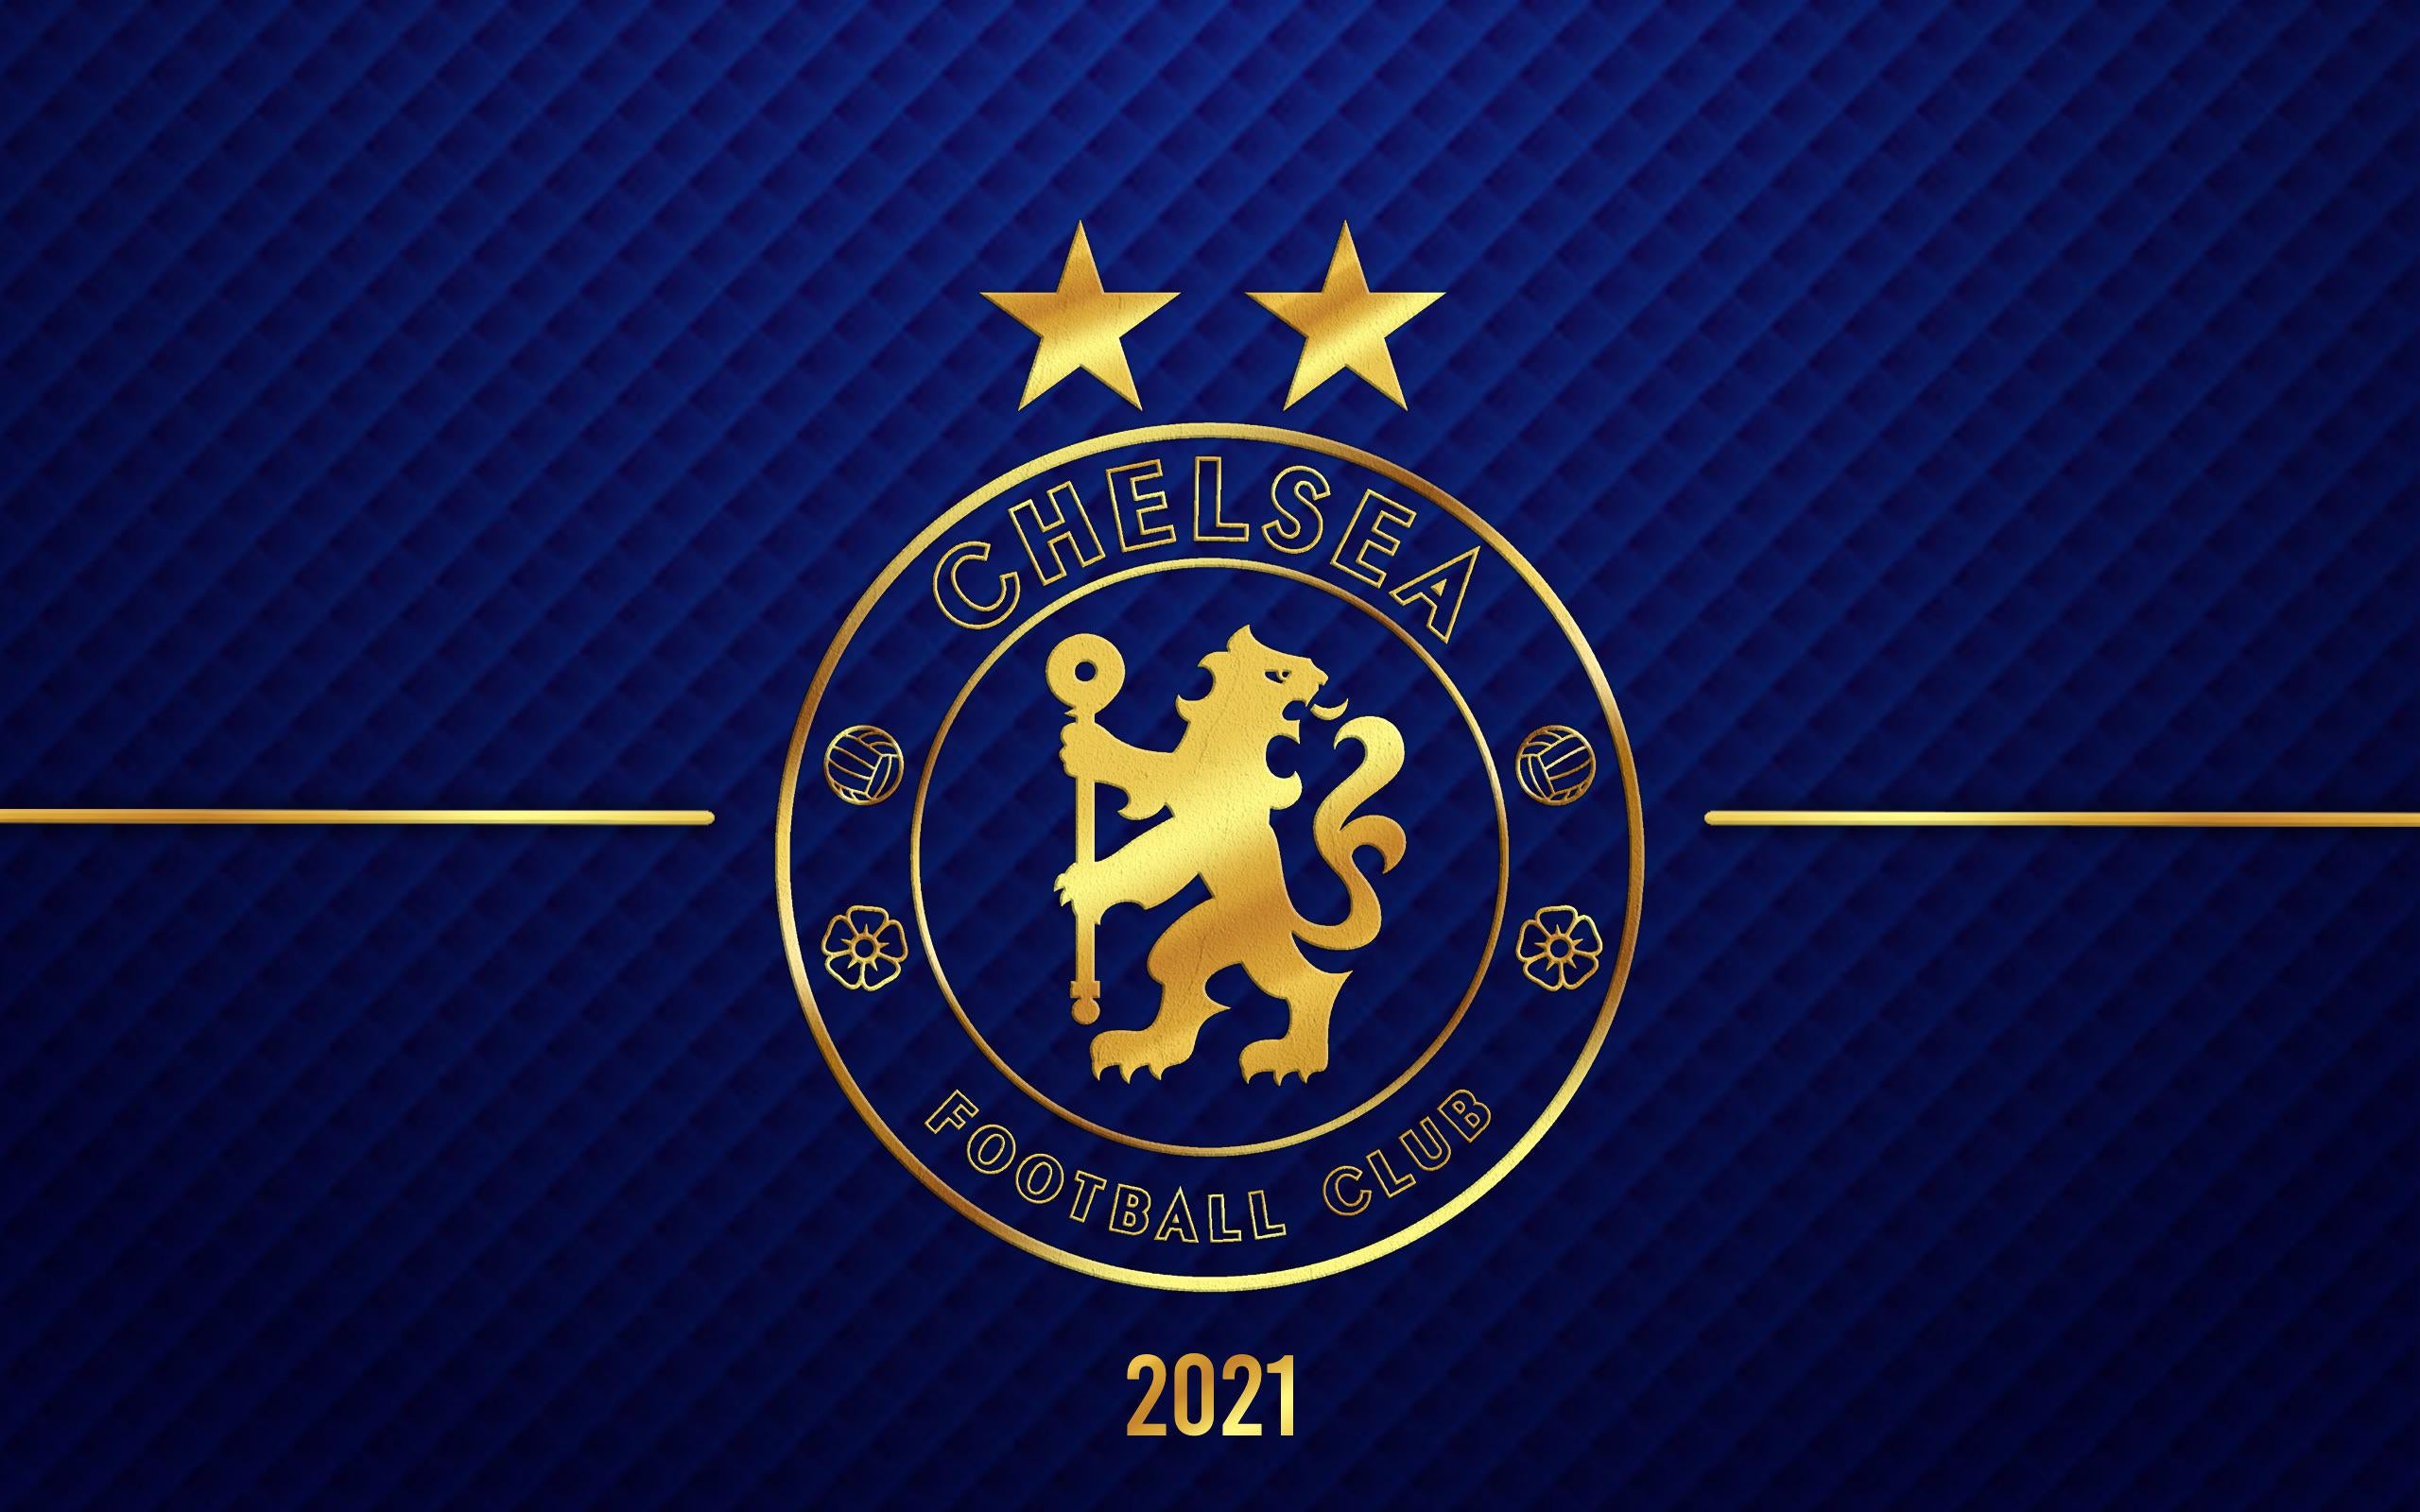 Made A Desktop And Phone Wallpaper For The Ucl Champions Chelseafc